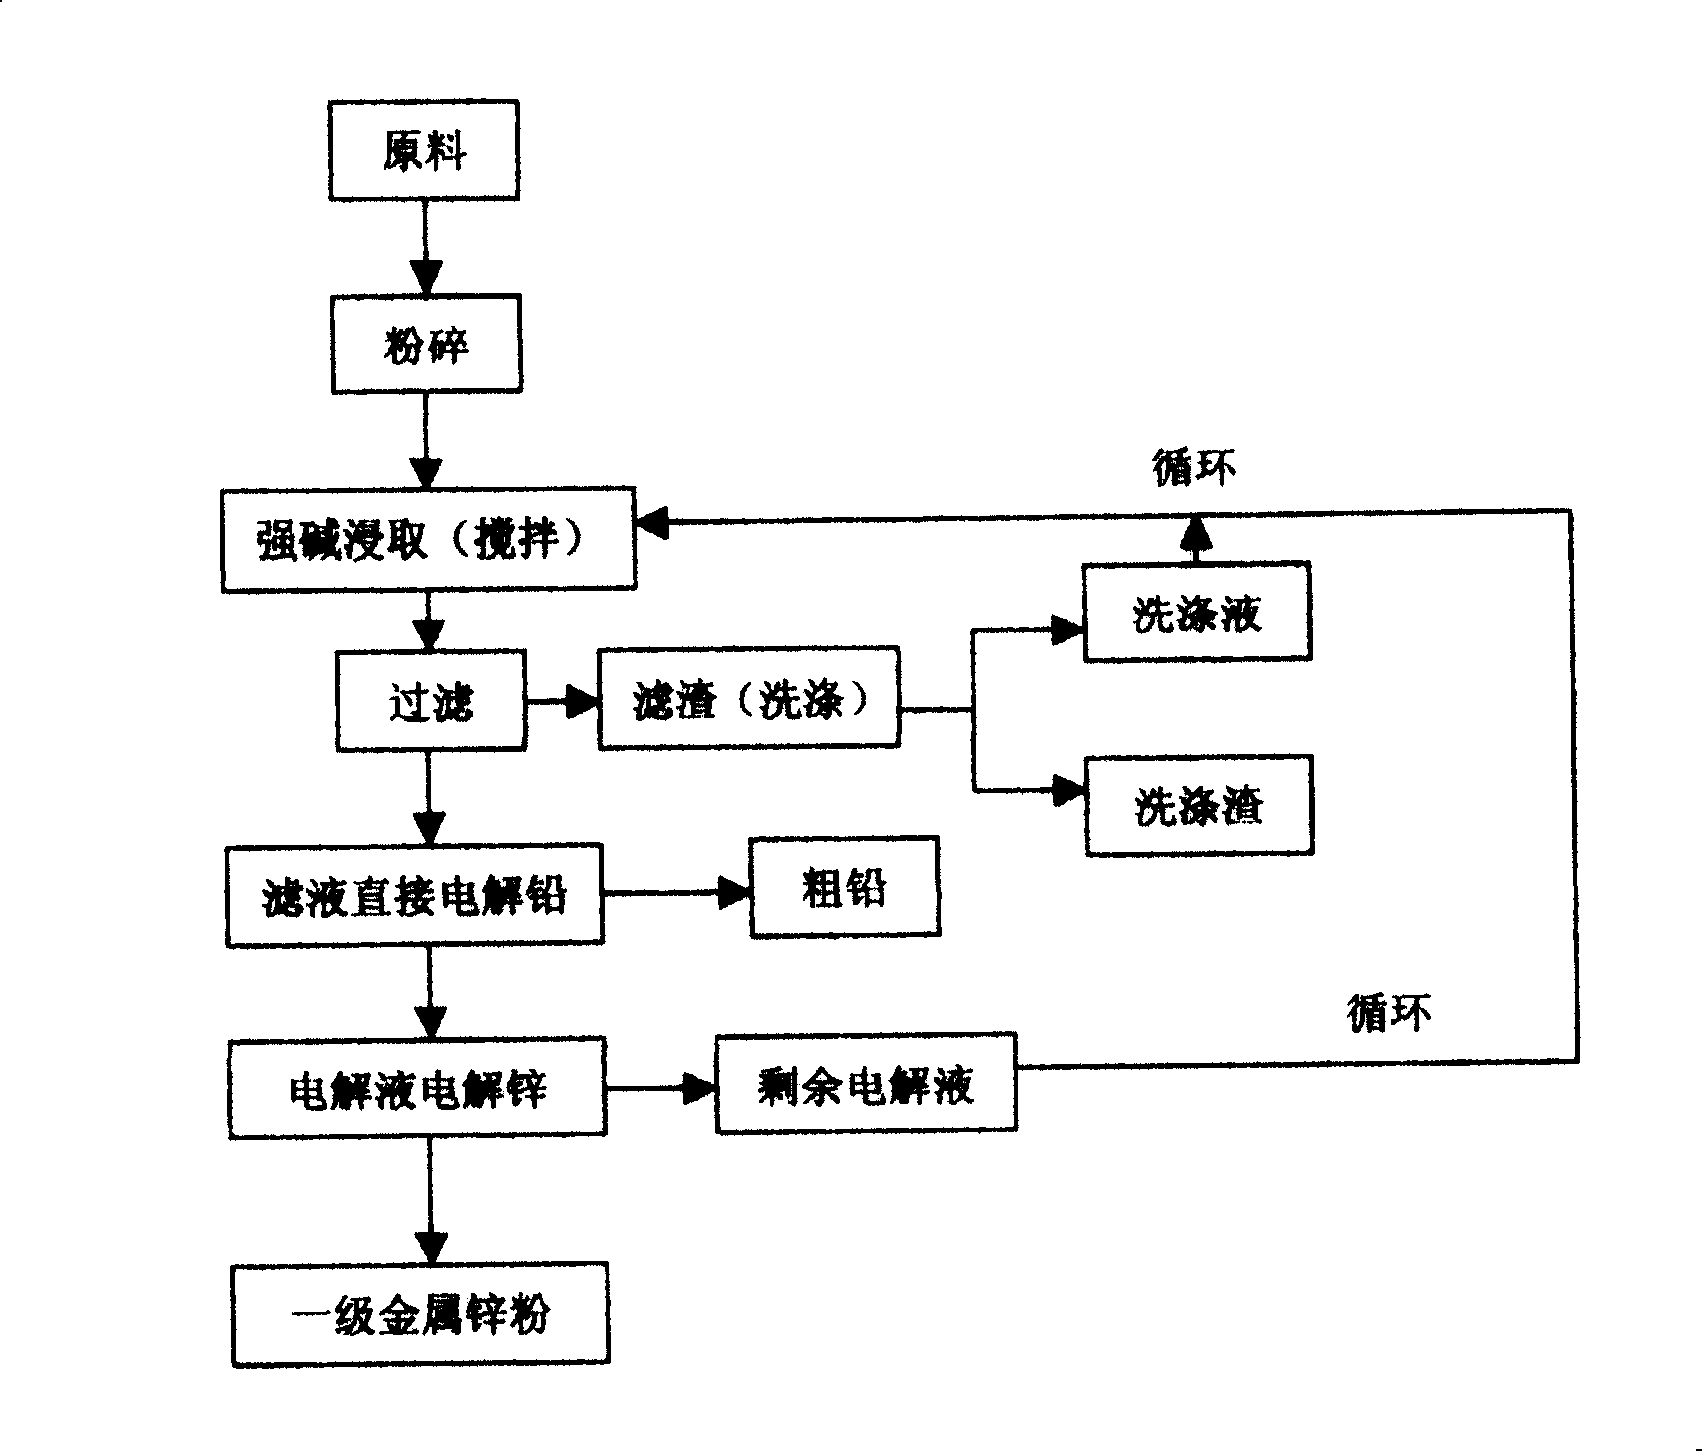 Method for producing metallic lead and zinc by using lead-zinc containing waste slag or lead-zinc monoxide mine